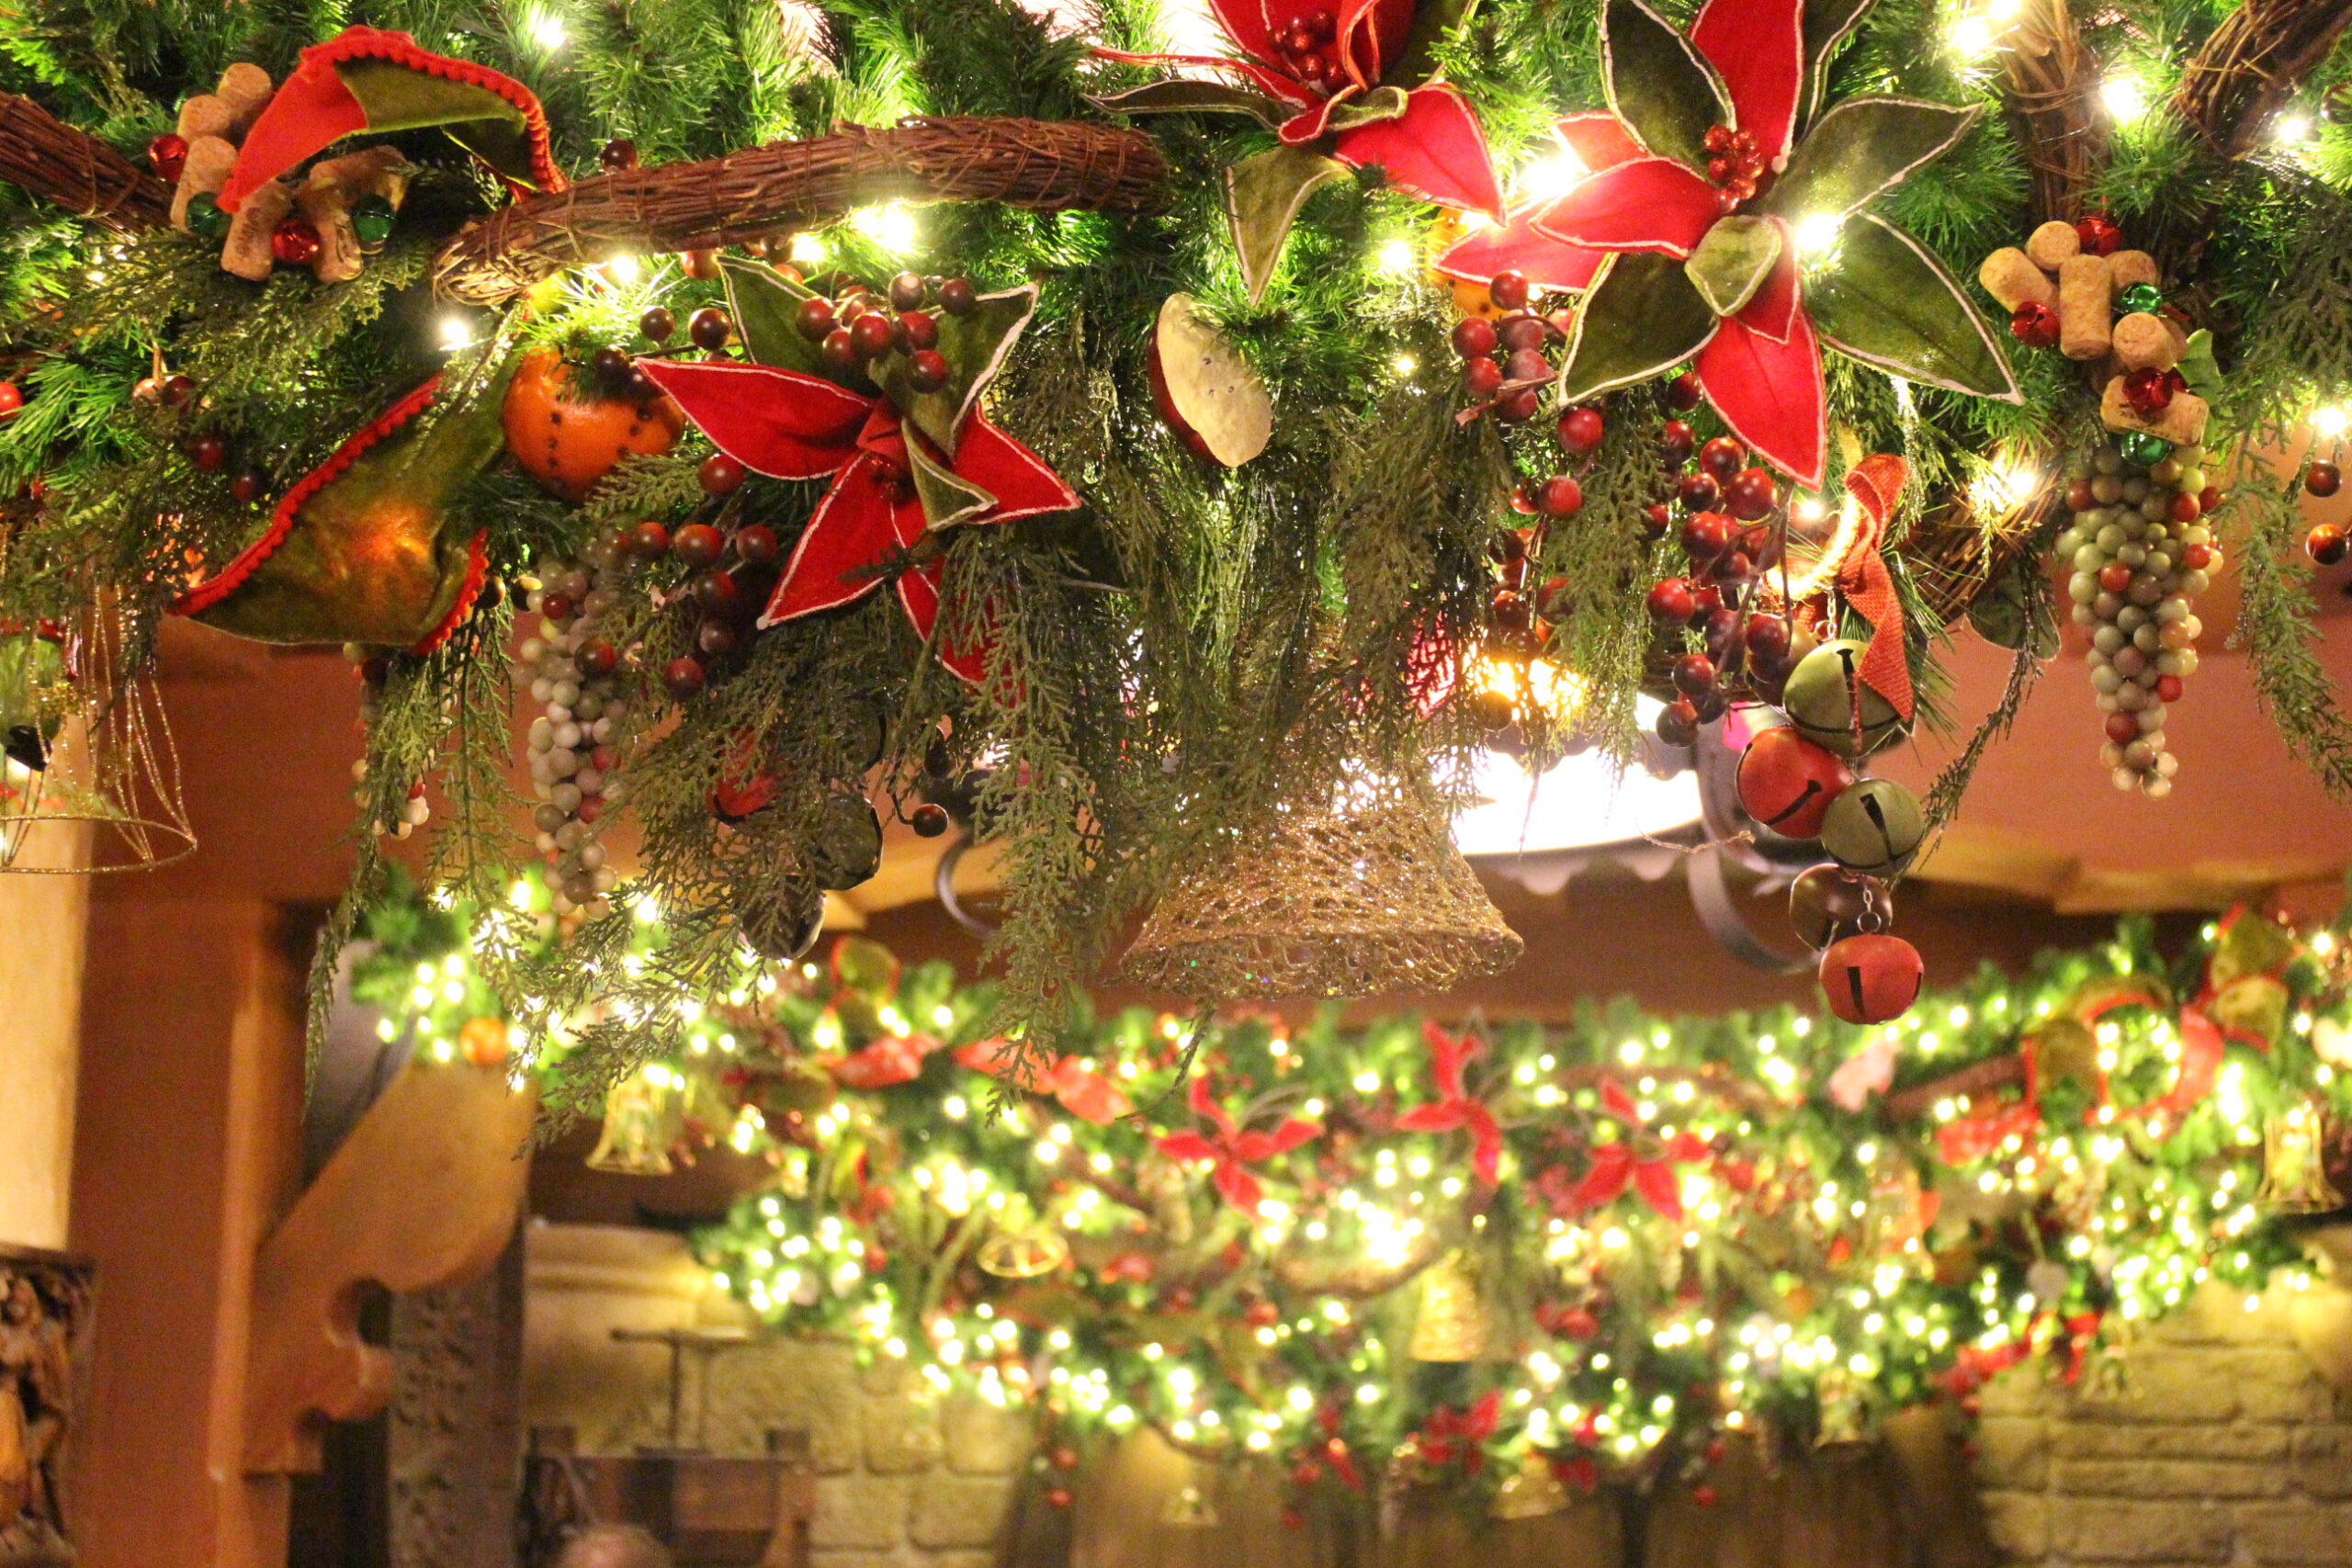 hanging green garlands with red bows and berries